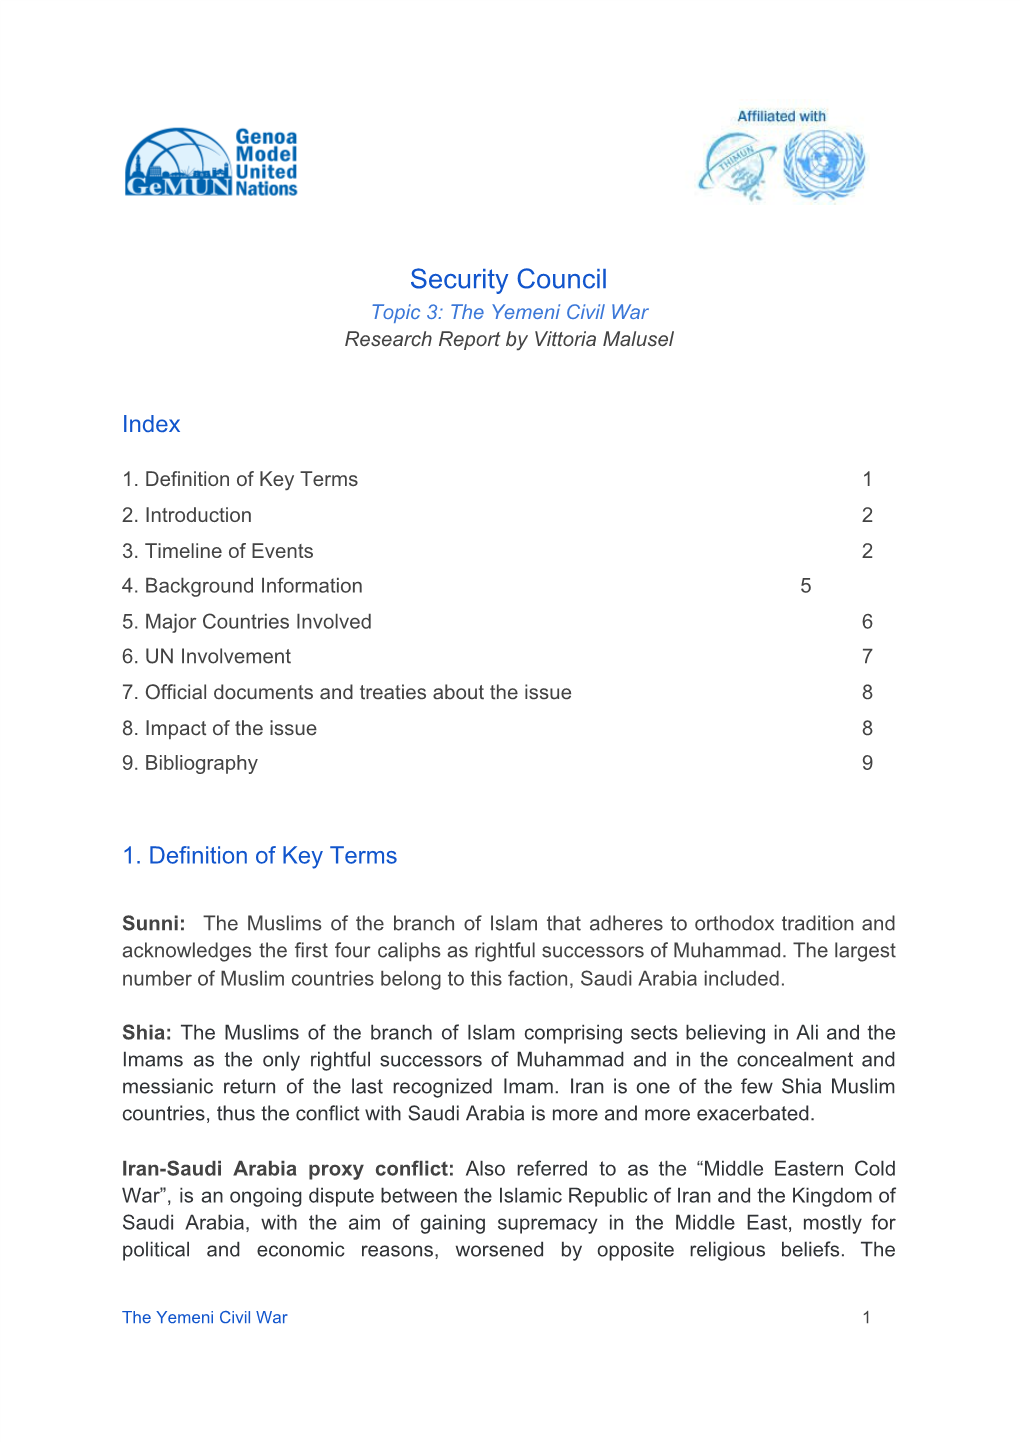 Security Council Topic 3: the Yemeni Civil War Research Report by Vittoria Malusel